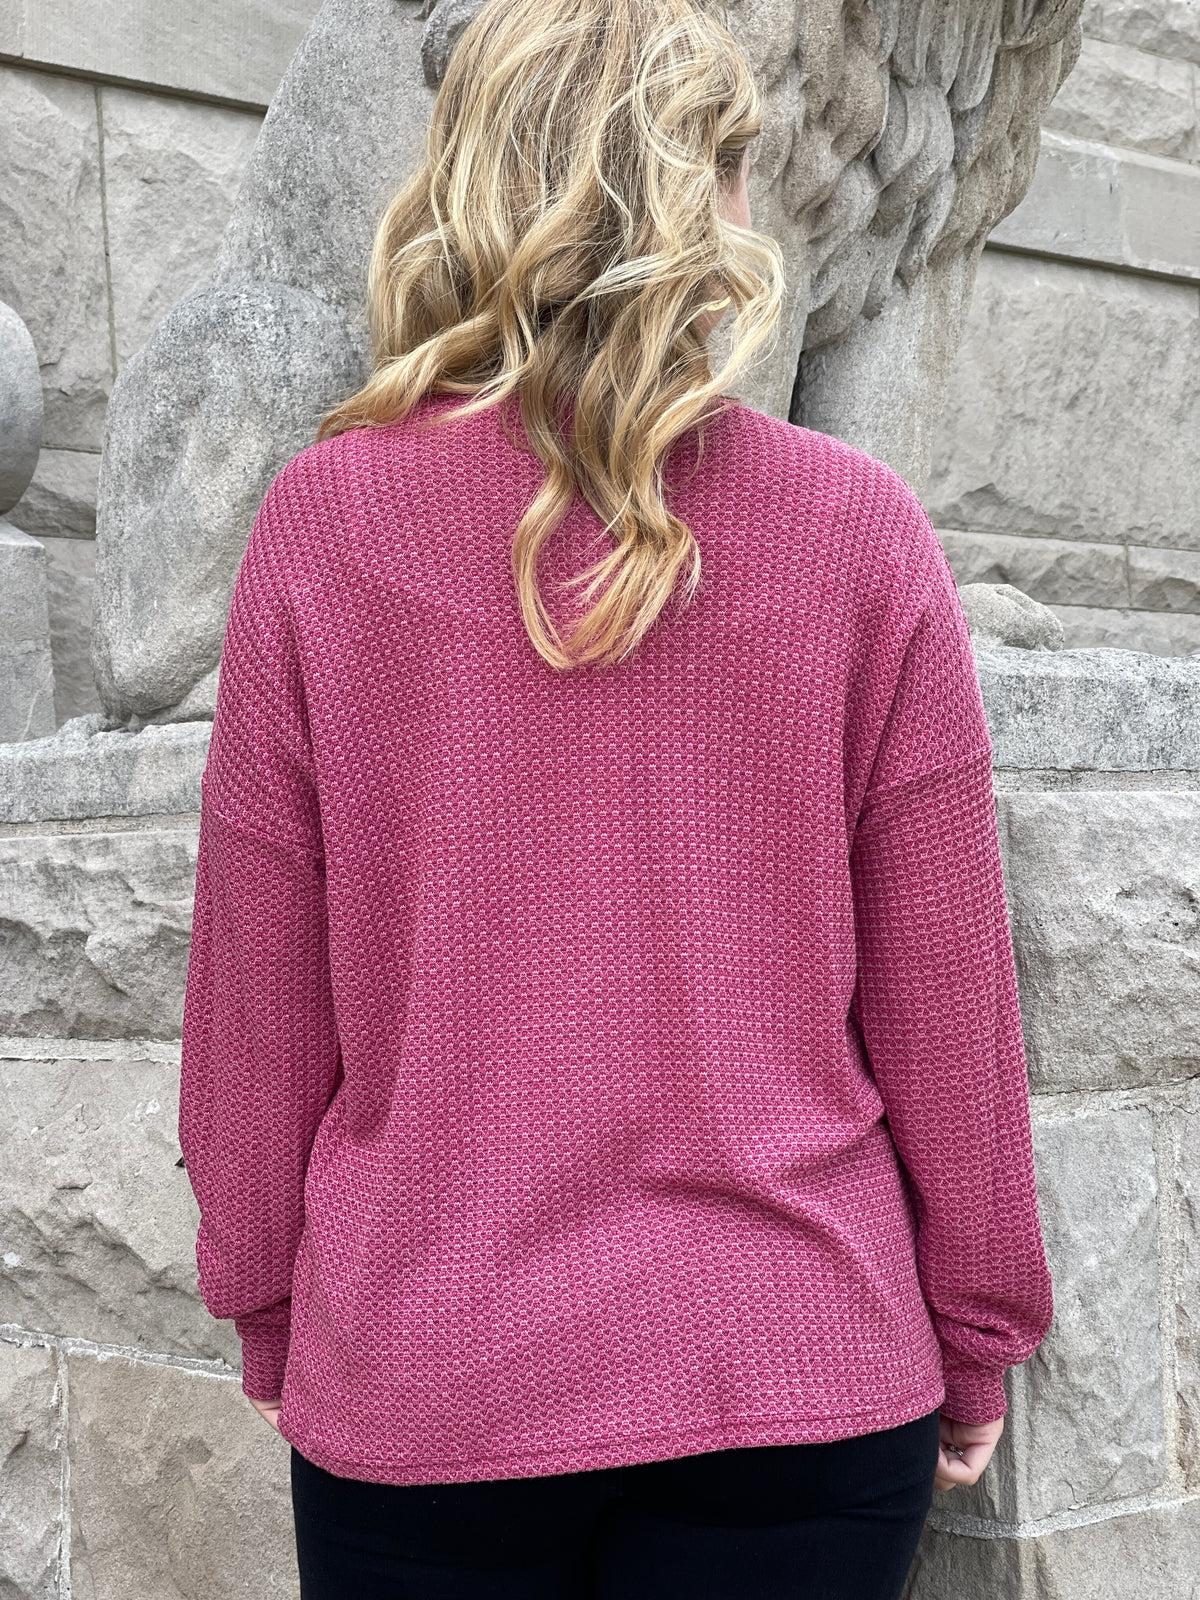 TWO TONE BURGUNDY WAFFLE KNIT LONG SLEEVE TOP